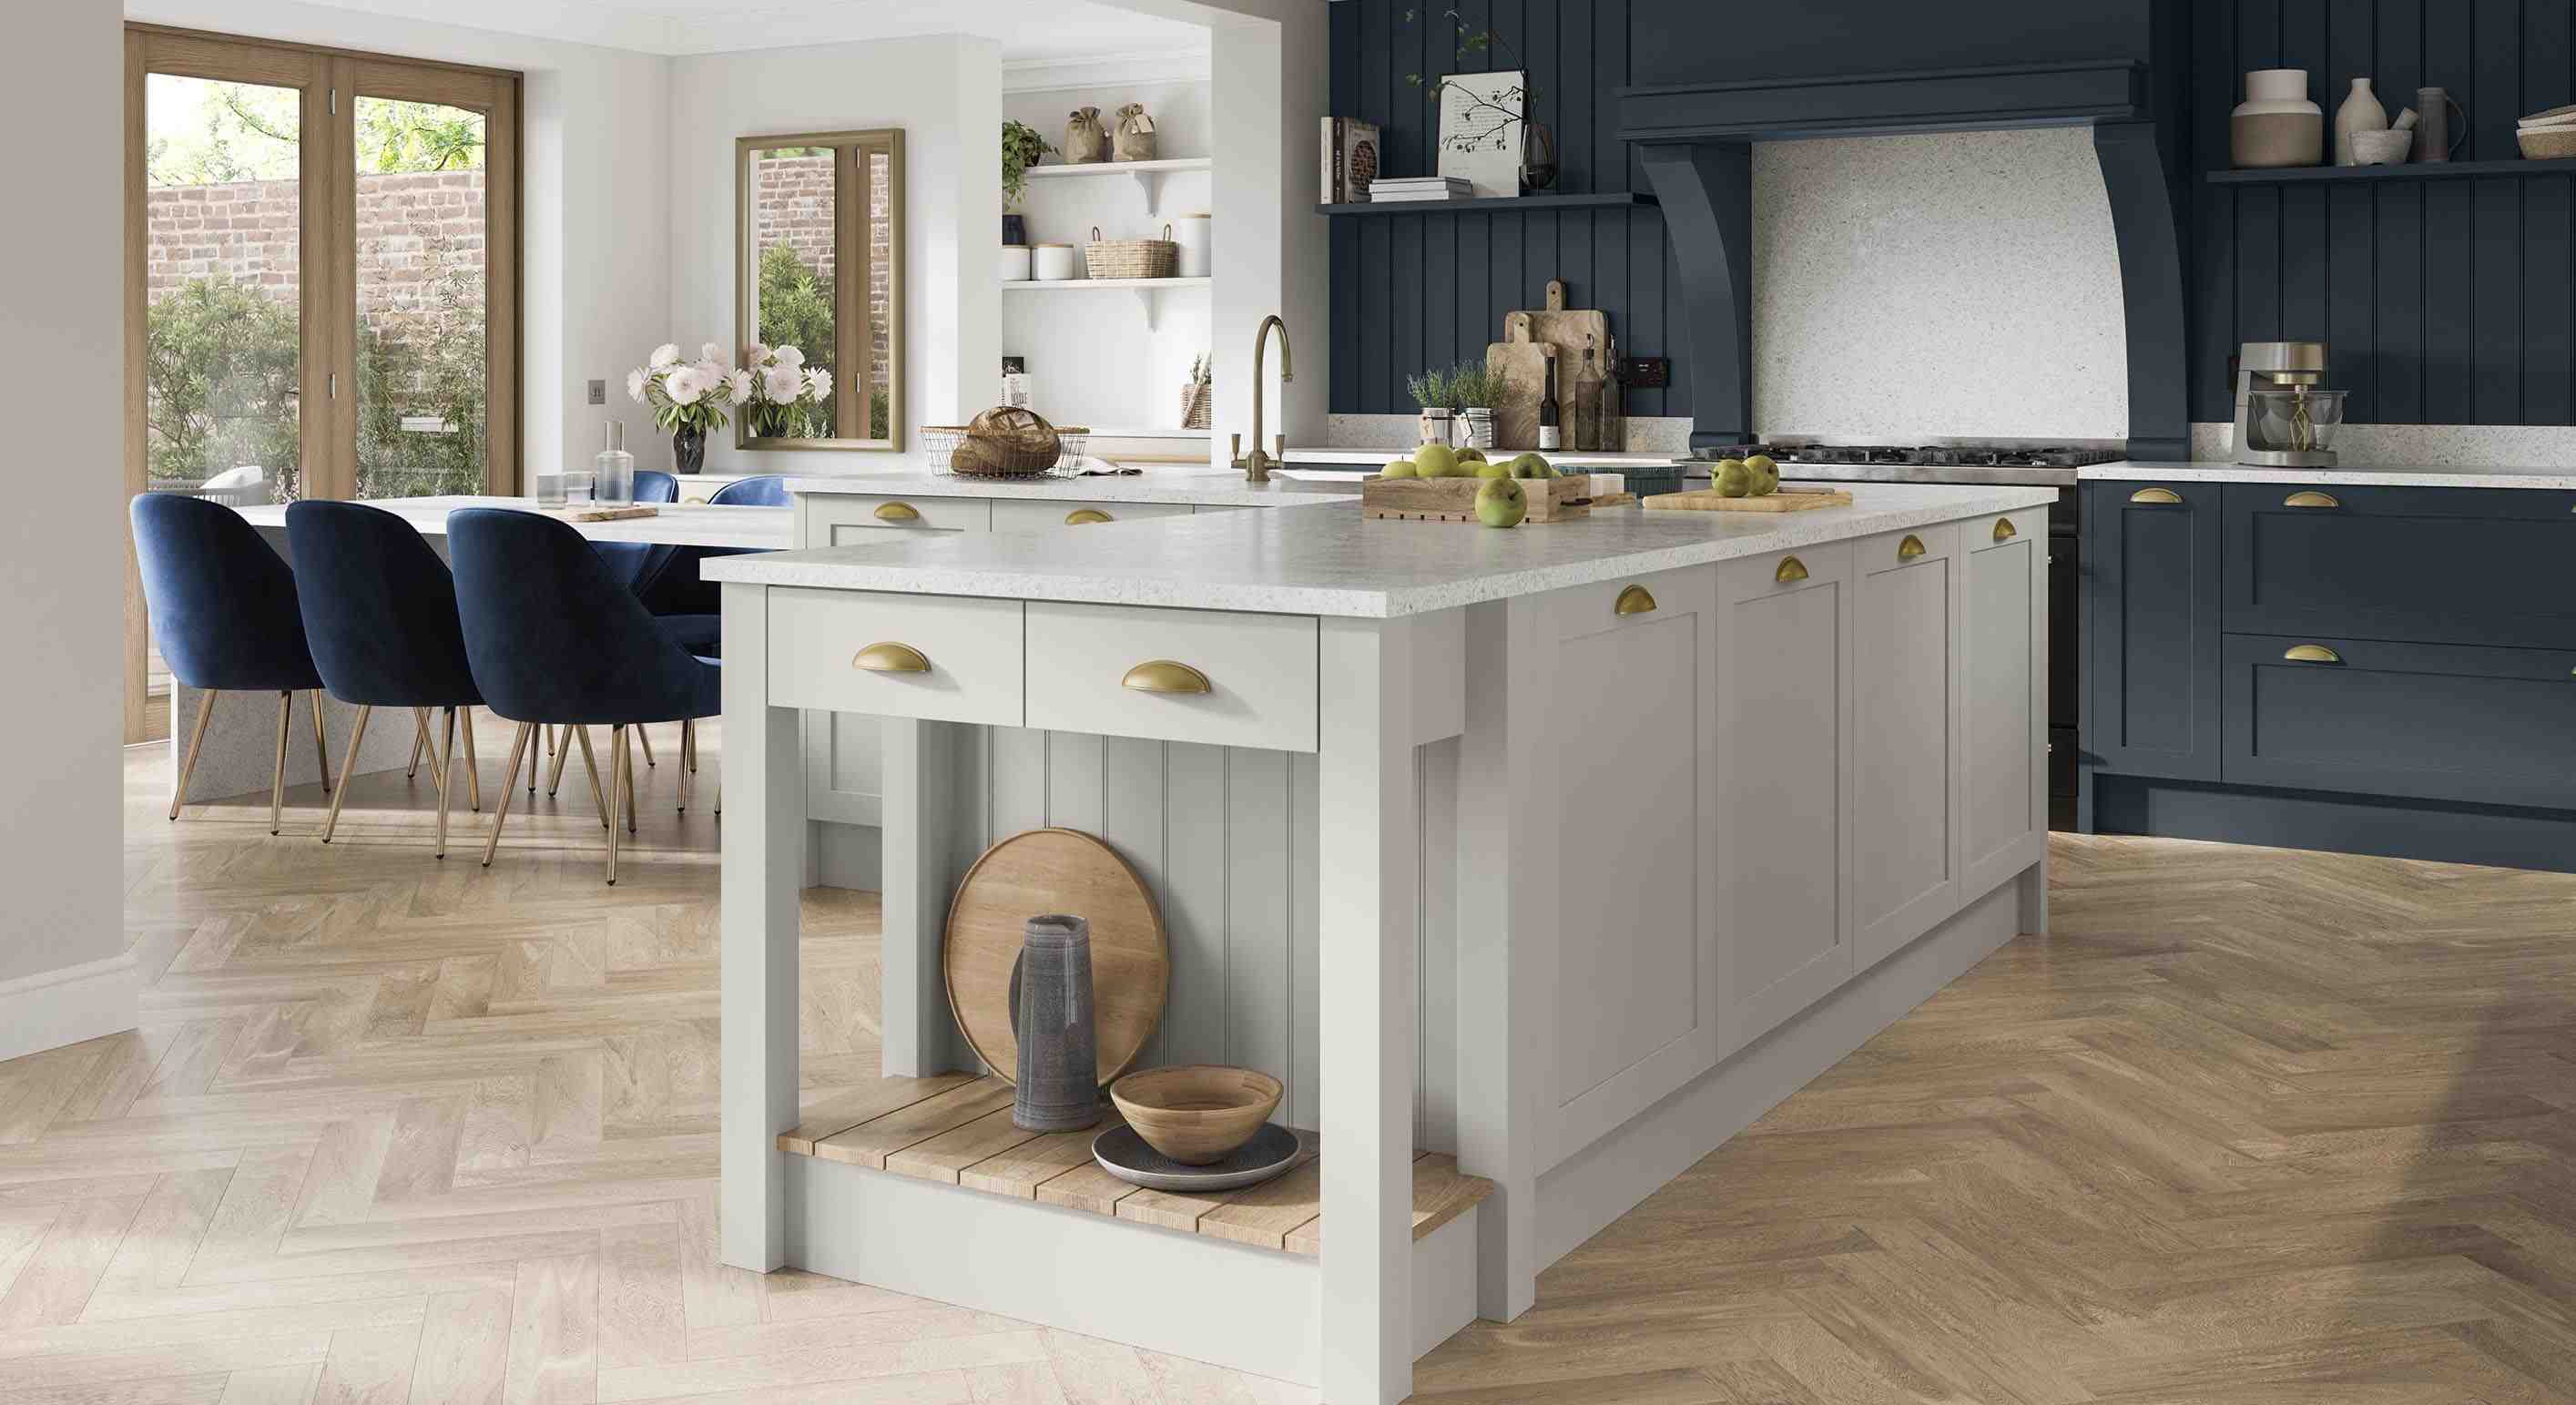 the simplistic, understated style of the clifden range offers ultimate versatility when it comes to devising the perfect kitchen space. its widespread appeal means it sits right at home in a country setting and fuses perfectly with contemporary elements such as the glazed patio doors and modern integrated seating area, resulting in a flawless, functional space.